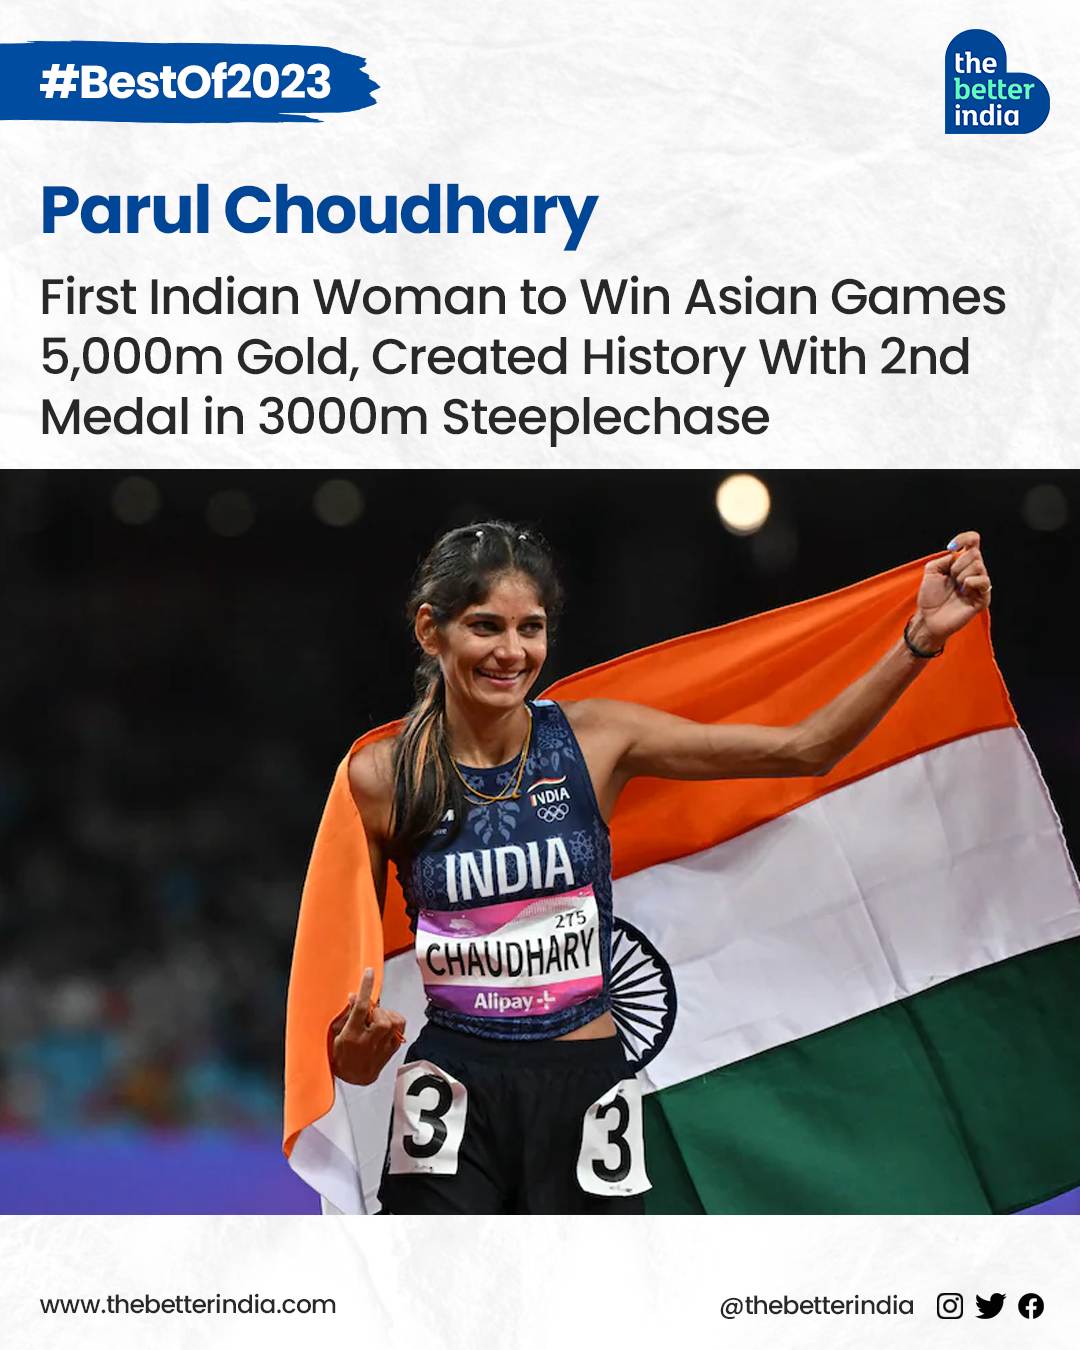 Parul Choudhary won two medals at the Asian Games